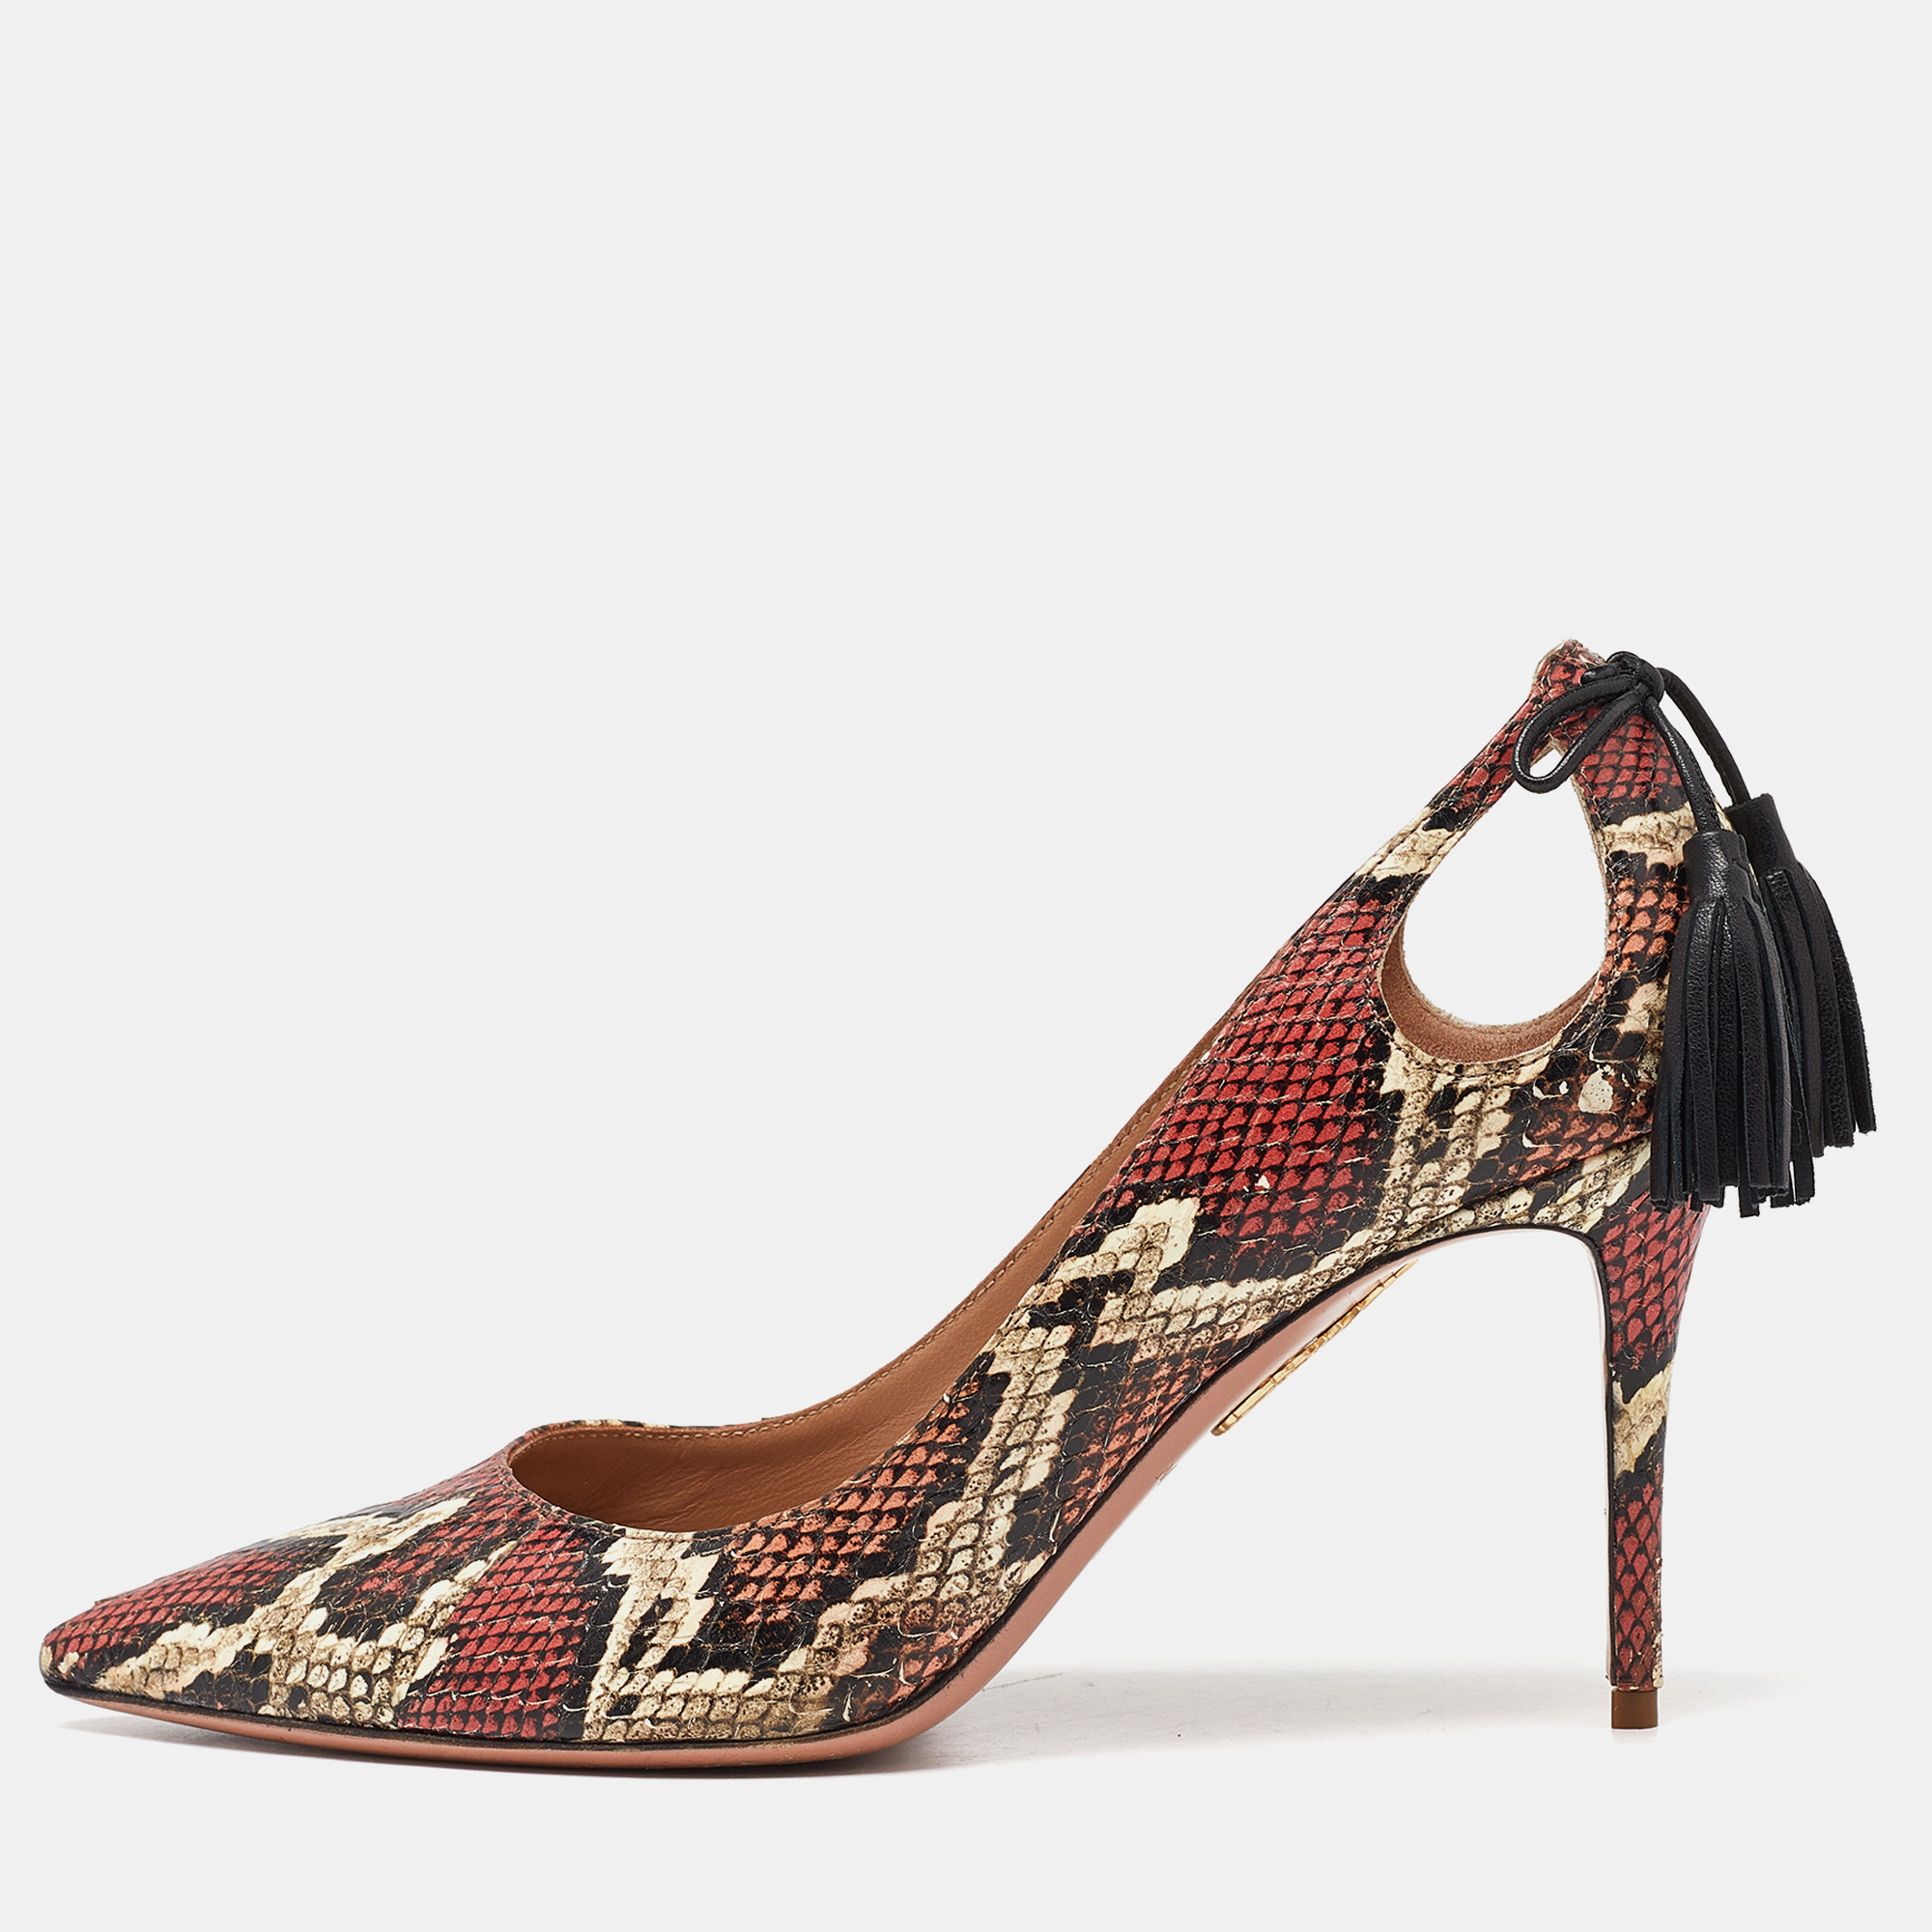 Aquazzura multicolor python leather forever marilyn tassel detail pointed toe pumps size 37